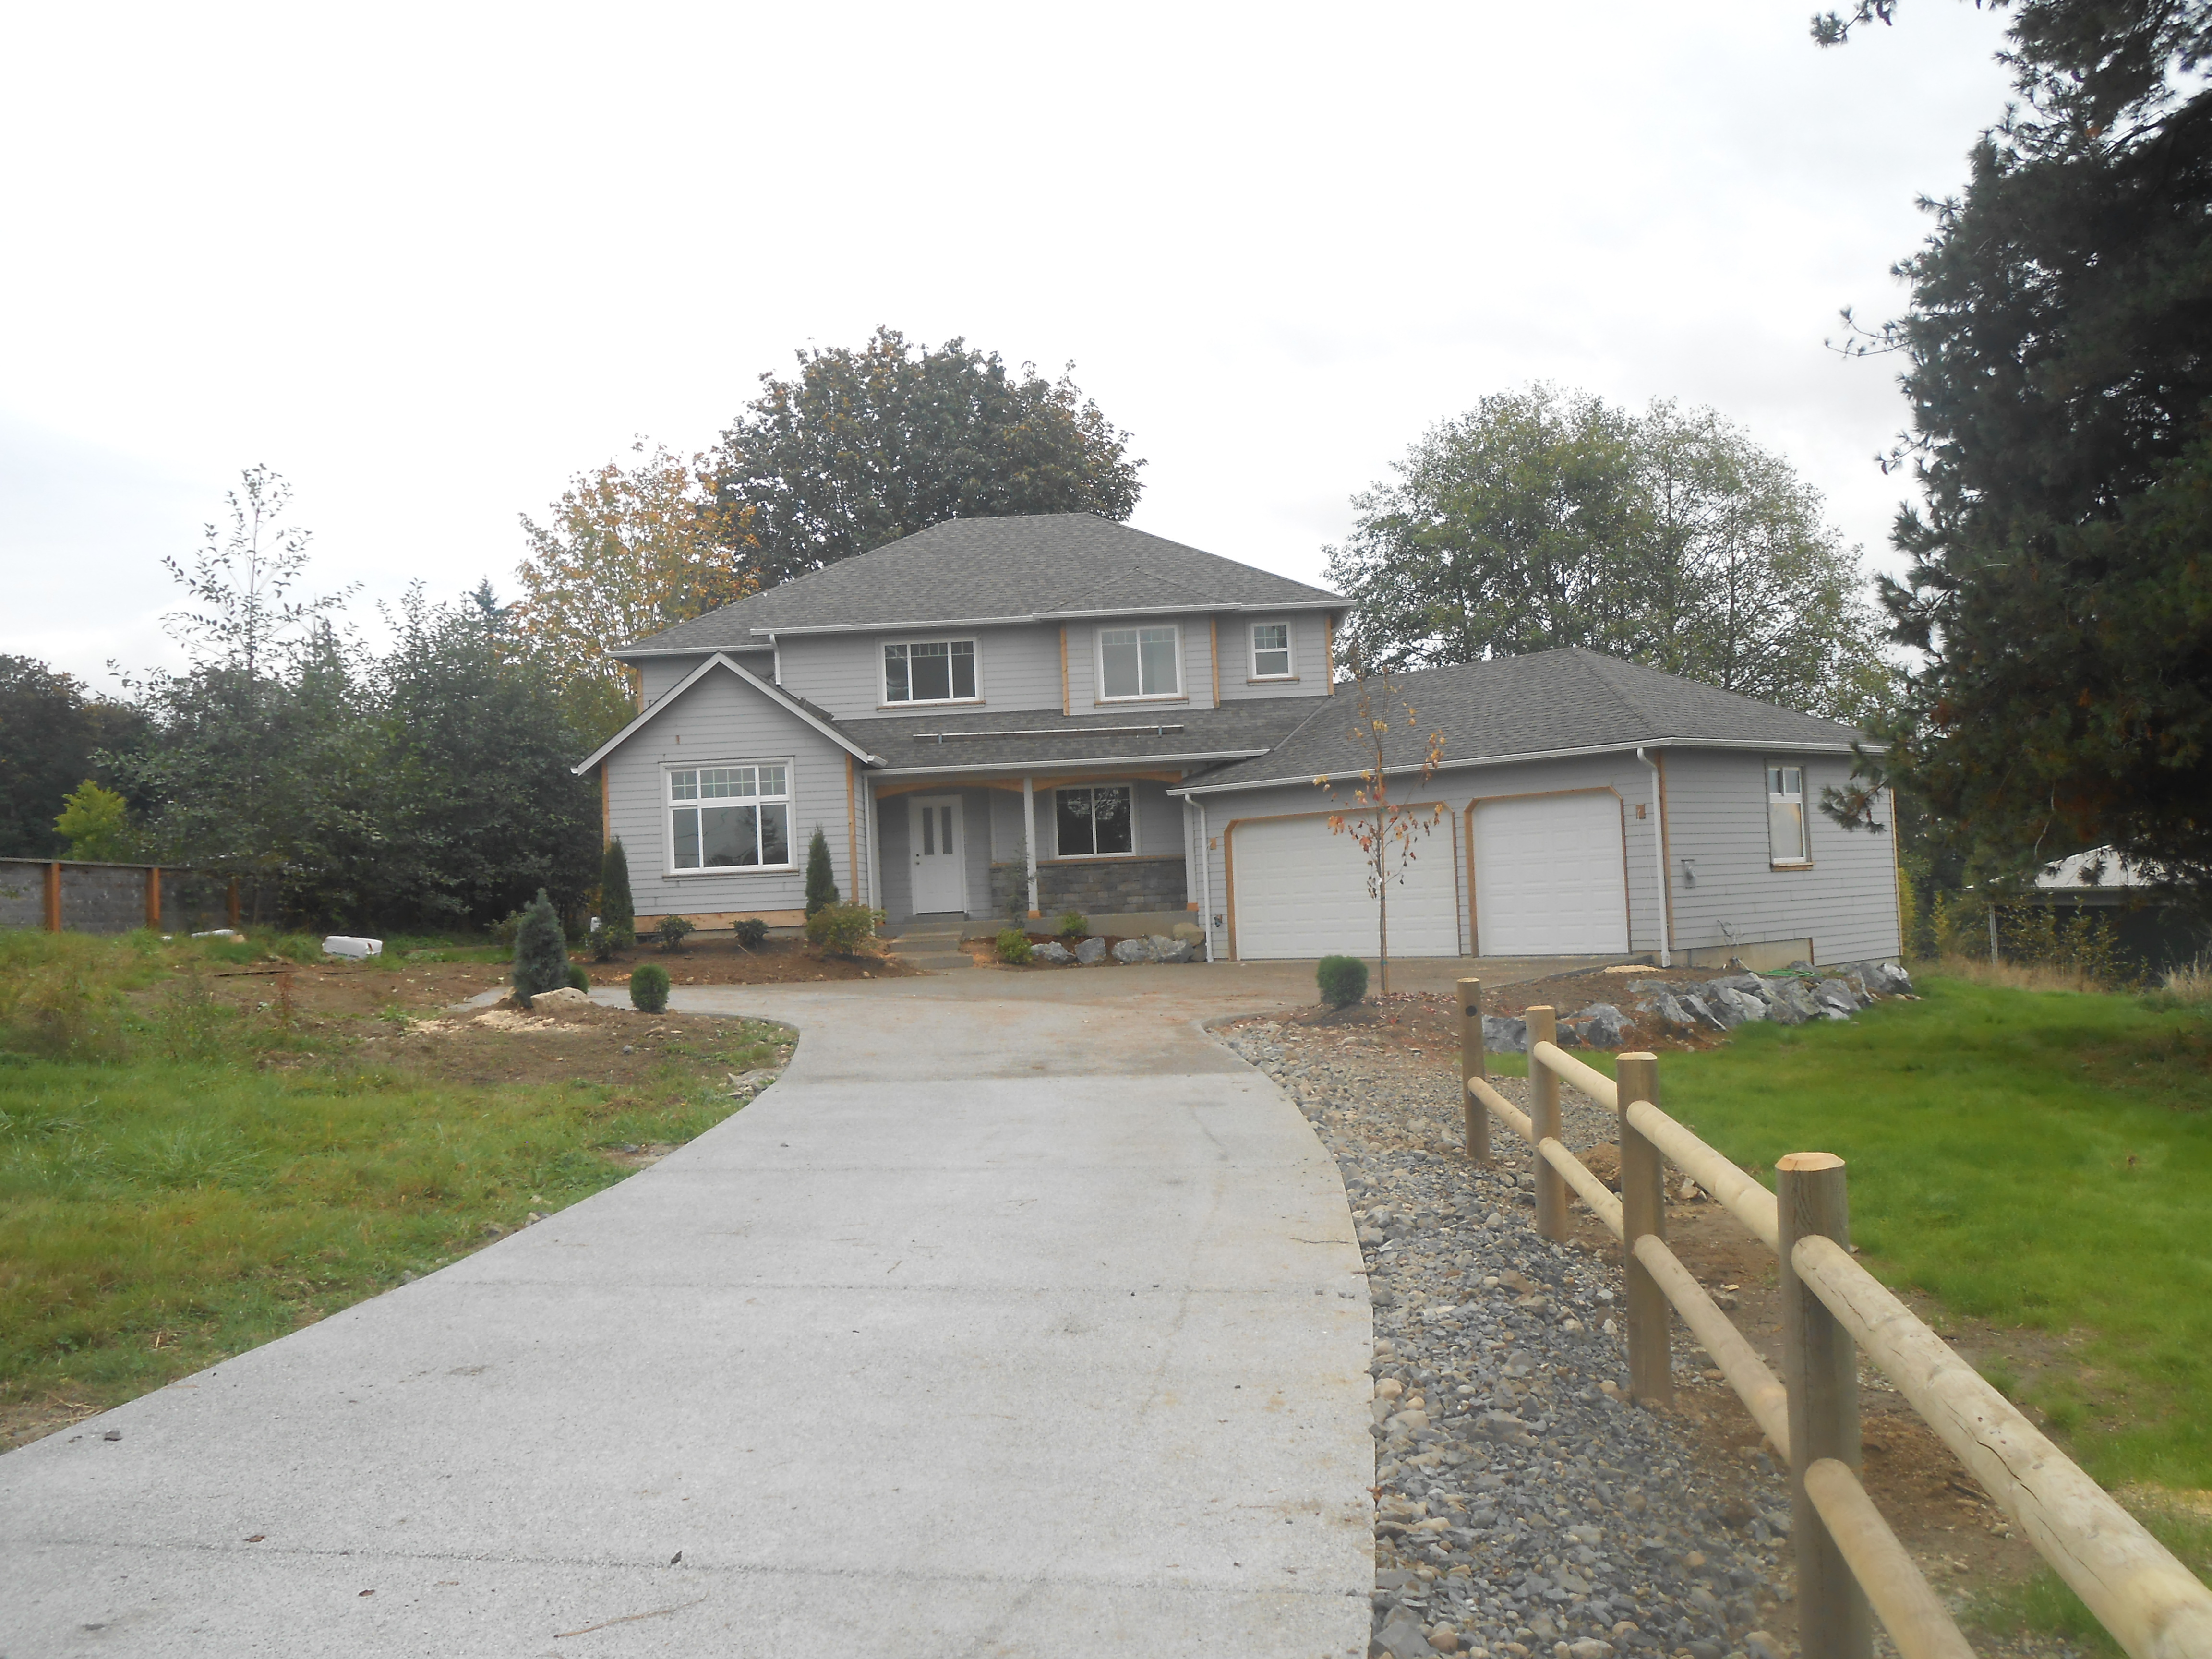 Property Photo: New 4 bedroom two story by tradesman homes! 7226 64th St SE  WA 98290 